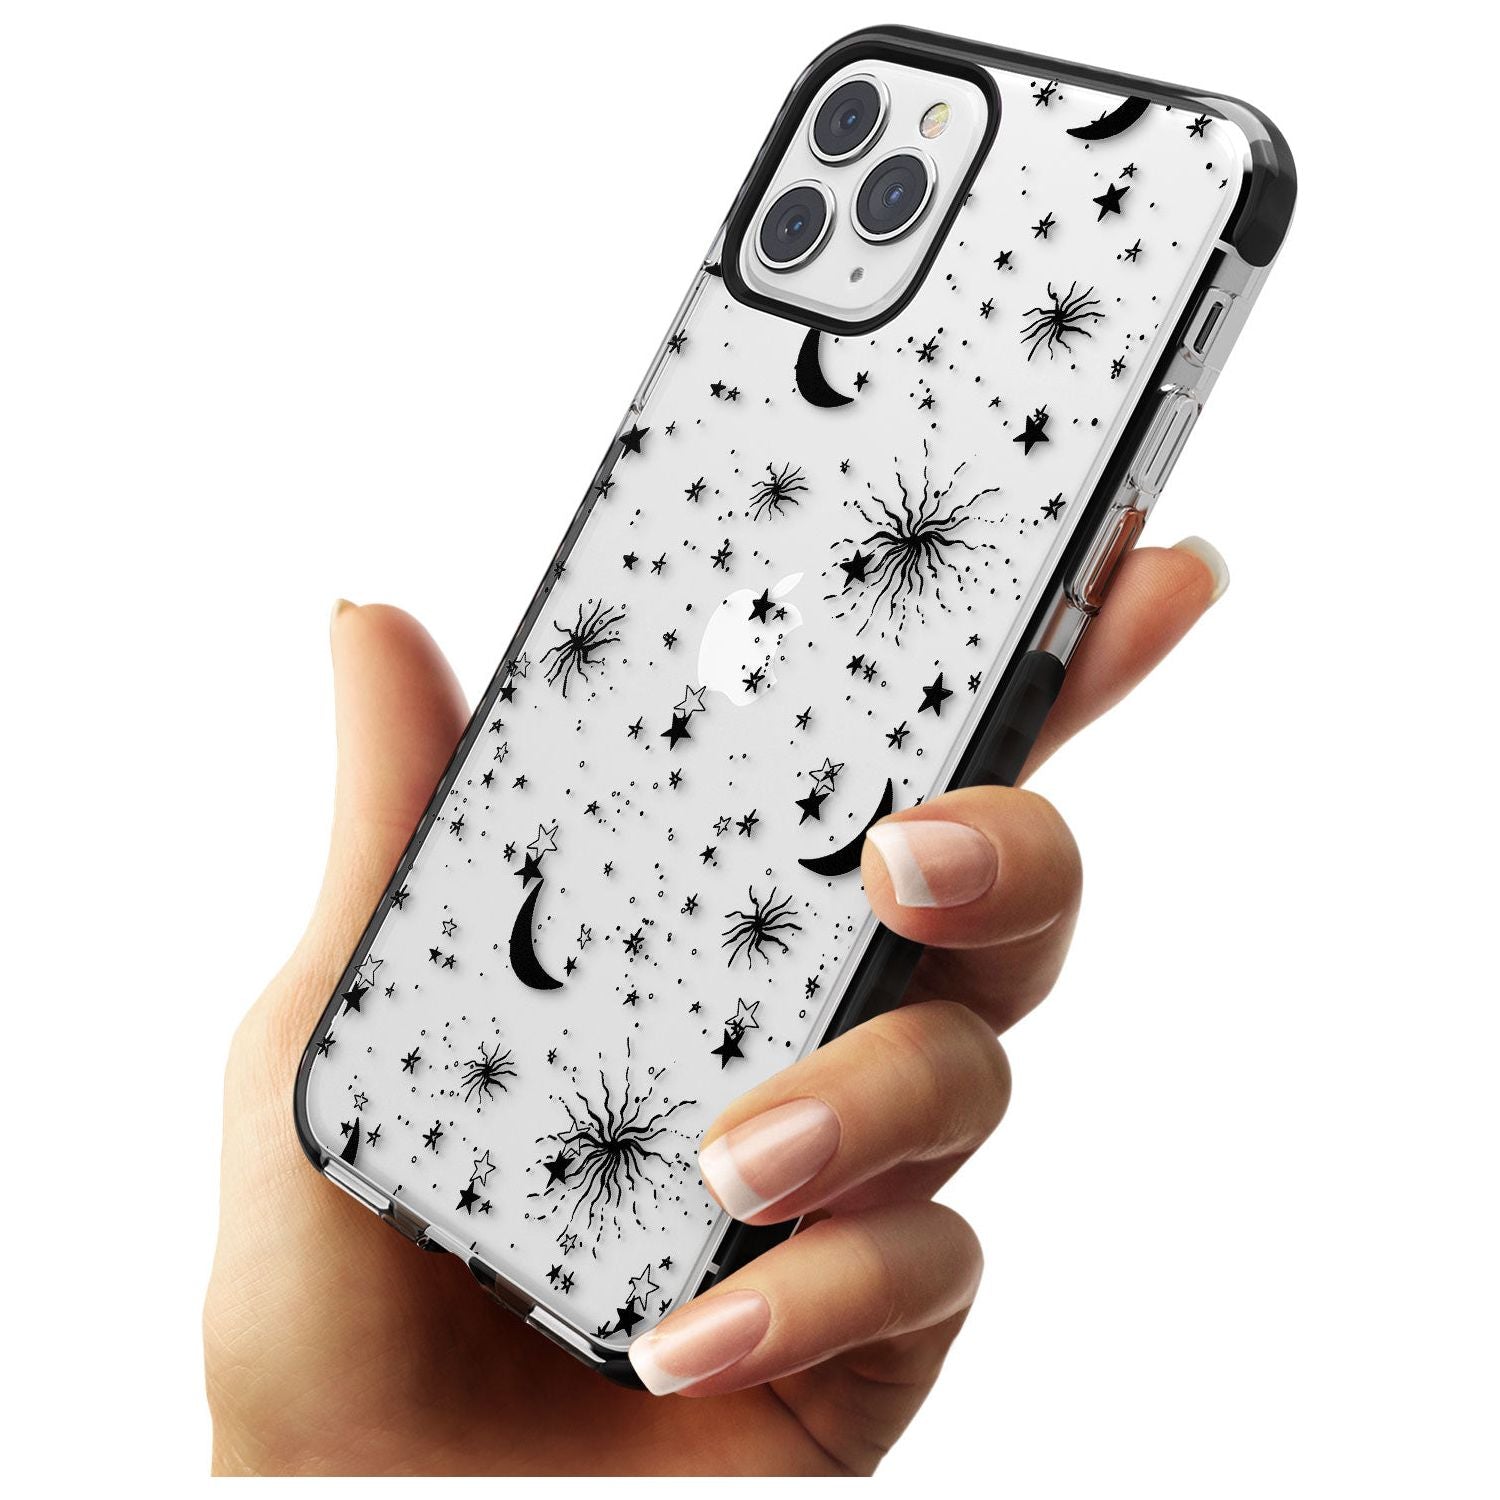 Moons & Stars Black Impact Phone Case for iPhone 11 Pro Max